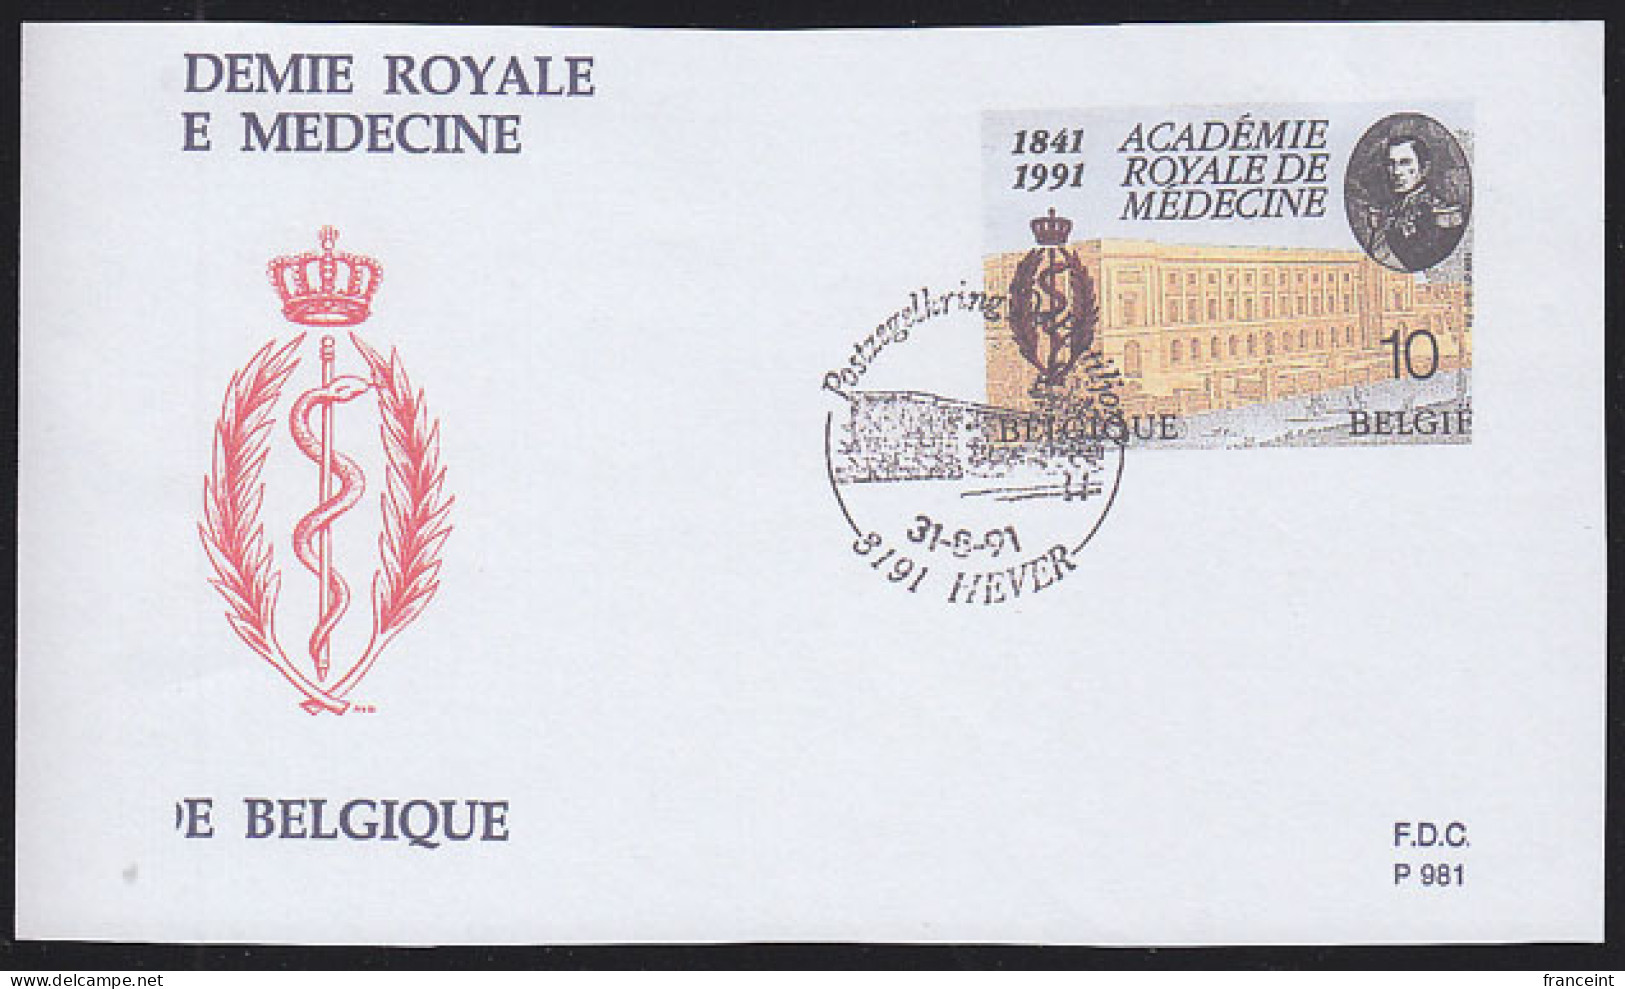 BELGIUM(1991) Caduceus. Die Proof In Black Signed By The Engraver, Representing The FDC Cachet. Scott 1409. - Proofs & Reprints